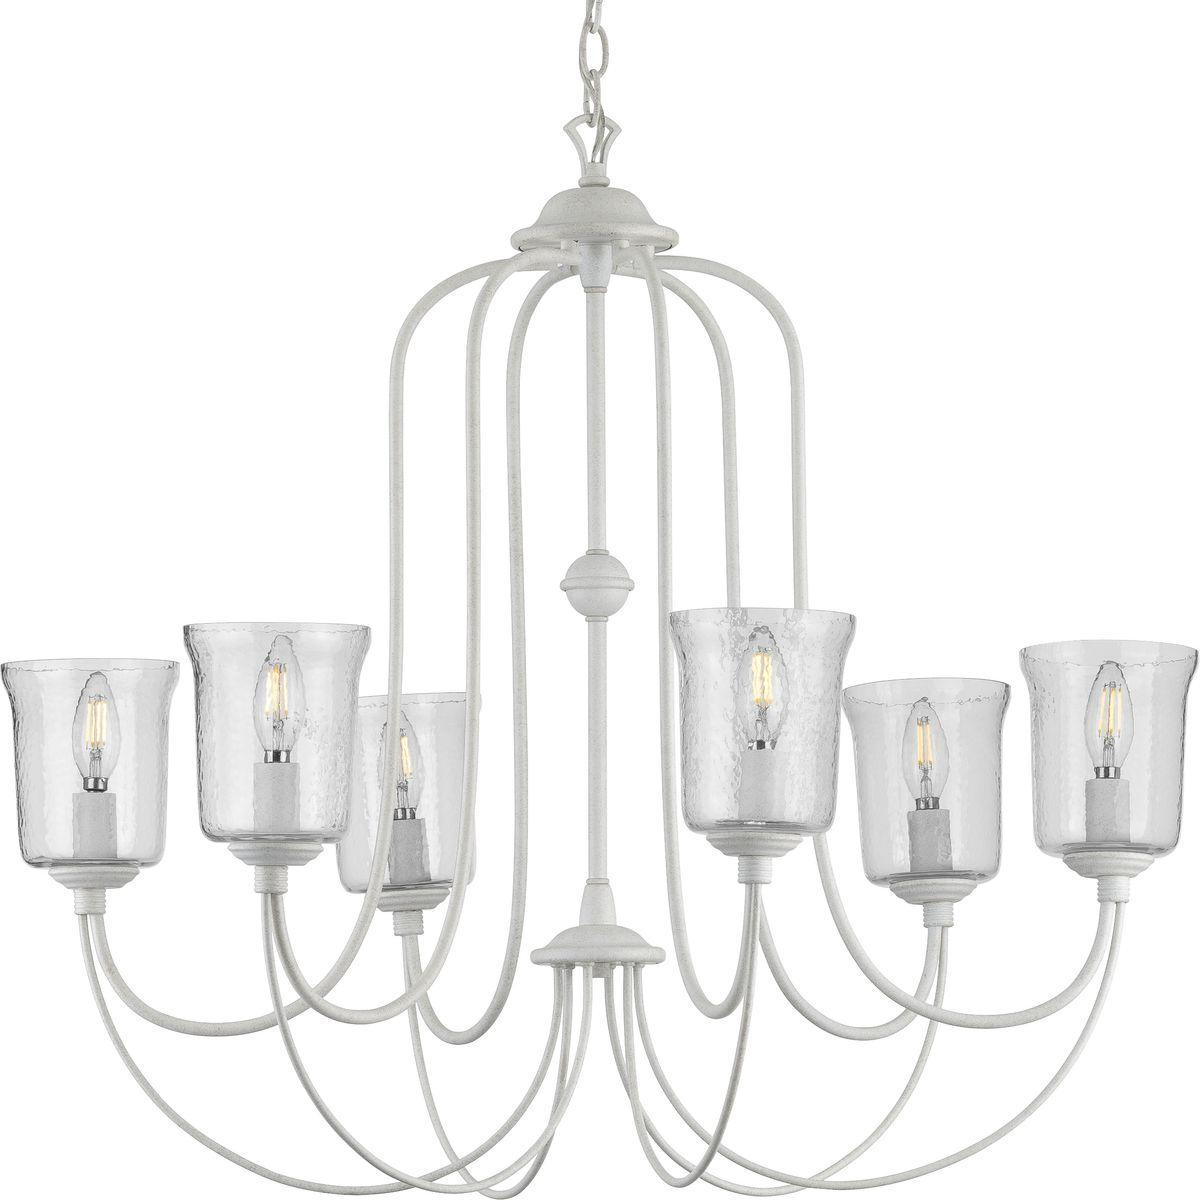 Hubbell P400195-151 Beautiful lighting will appeal to both your classic taste and your artistic spirit with the Bowman Collection Six Light Cottage White Chandelier. Wandering eyes will focus on the clear, chiseled glass shade that encircles four elegant light sources gather